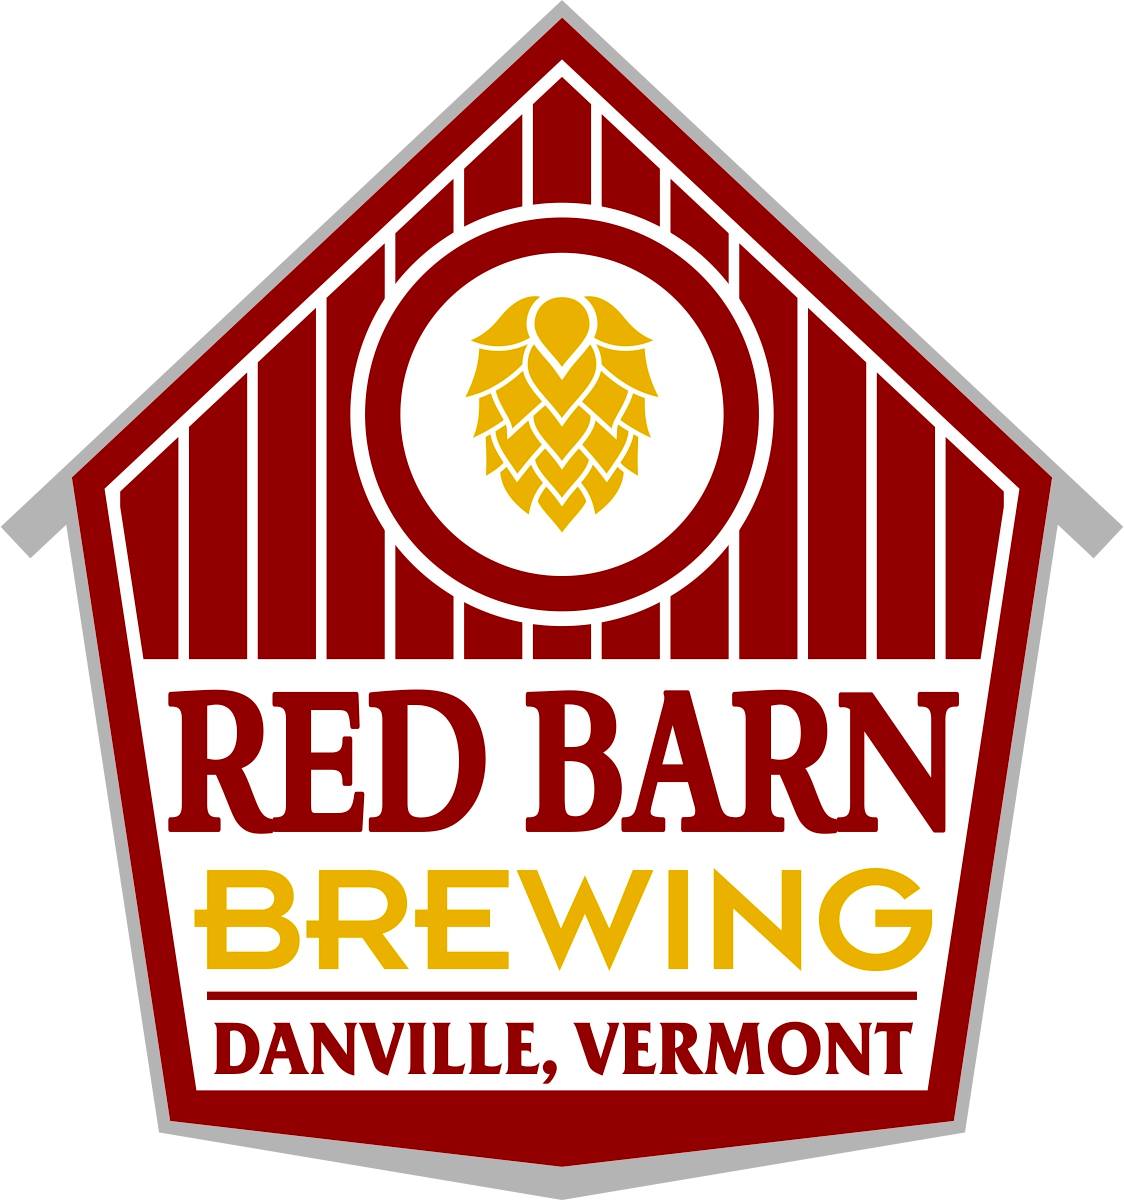 Red Barn Brewing in Danville, Vermont